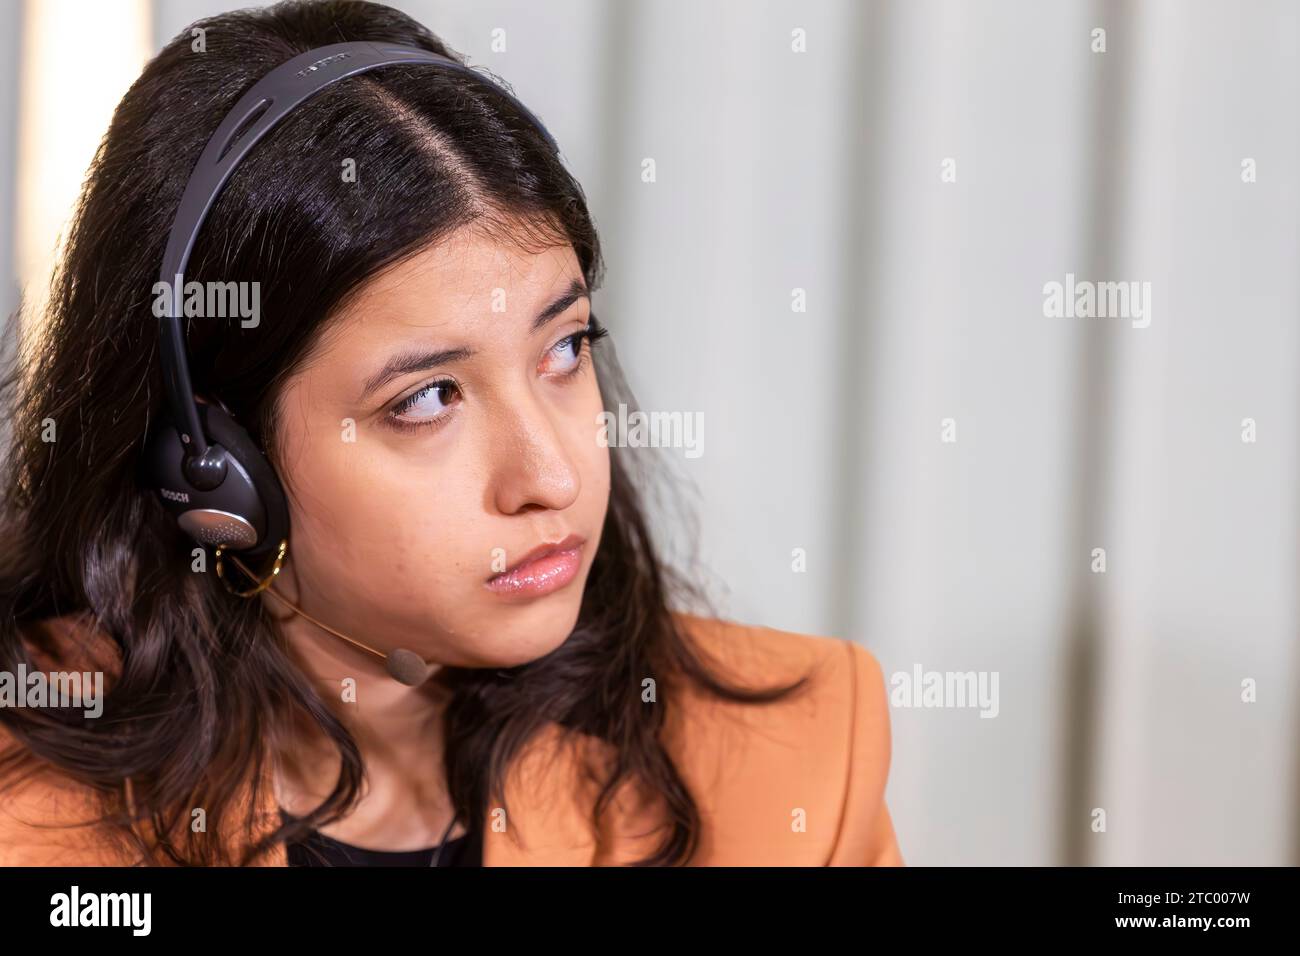 Oslo, Norway 09 December 2023 Riana Rahmani the daughter of this year’s Nobel Peace Prize Winner Narges Mohammadi of Iran, speaks during the press conference. Her mother is in prison in Iran and her daughter is representing her at the press conference at the Norwegian Nobel Institute in Oslo Norway.credit: Nigel Waldron/Alamy Live News Stock Photo